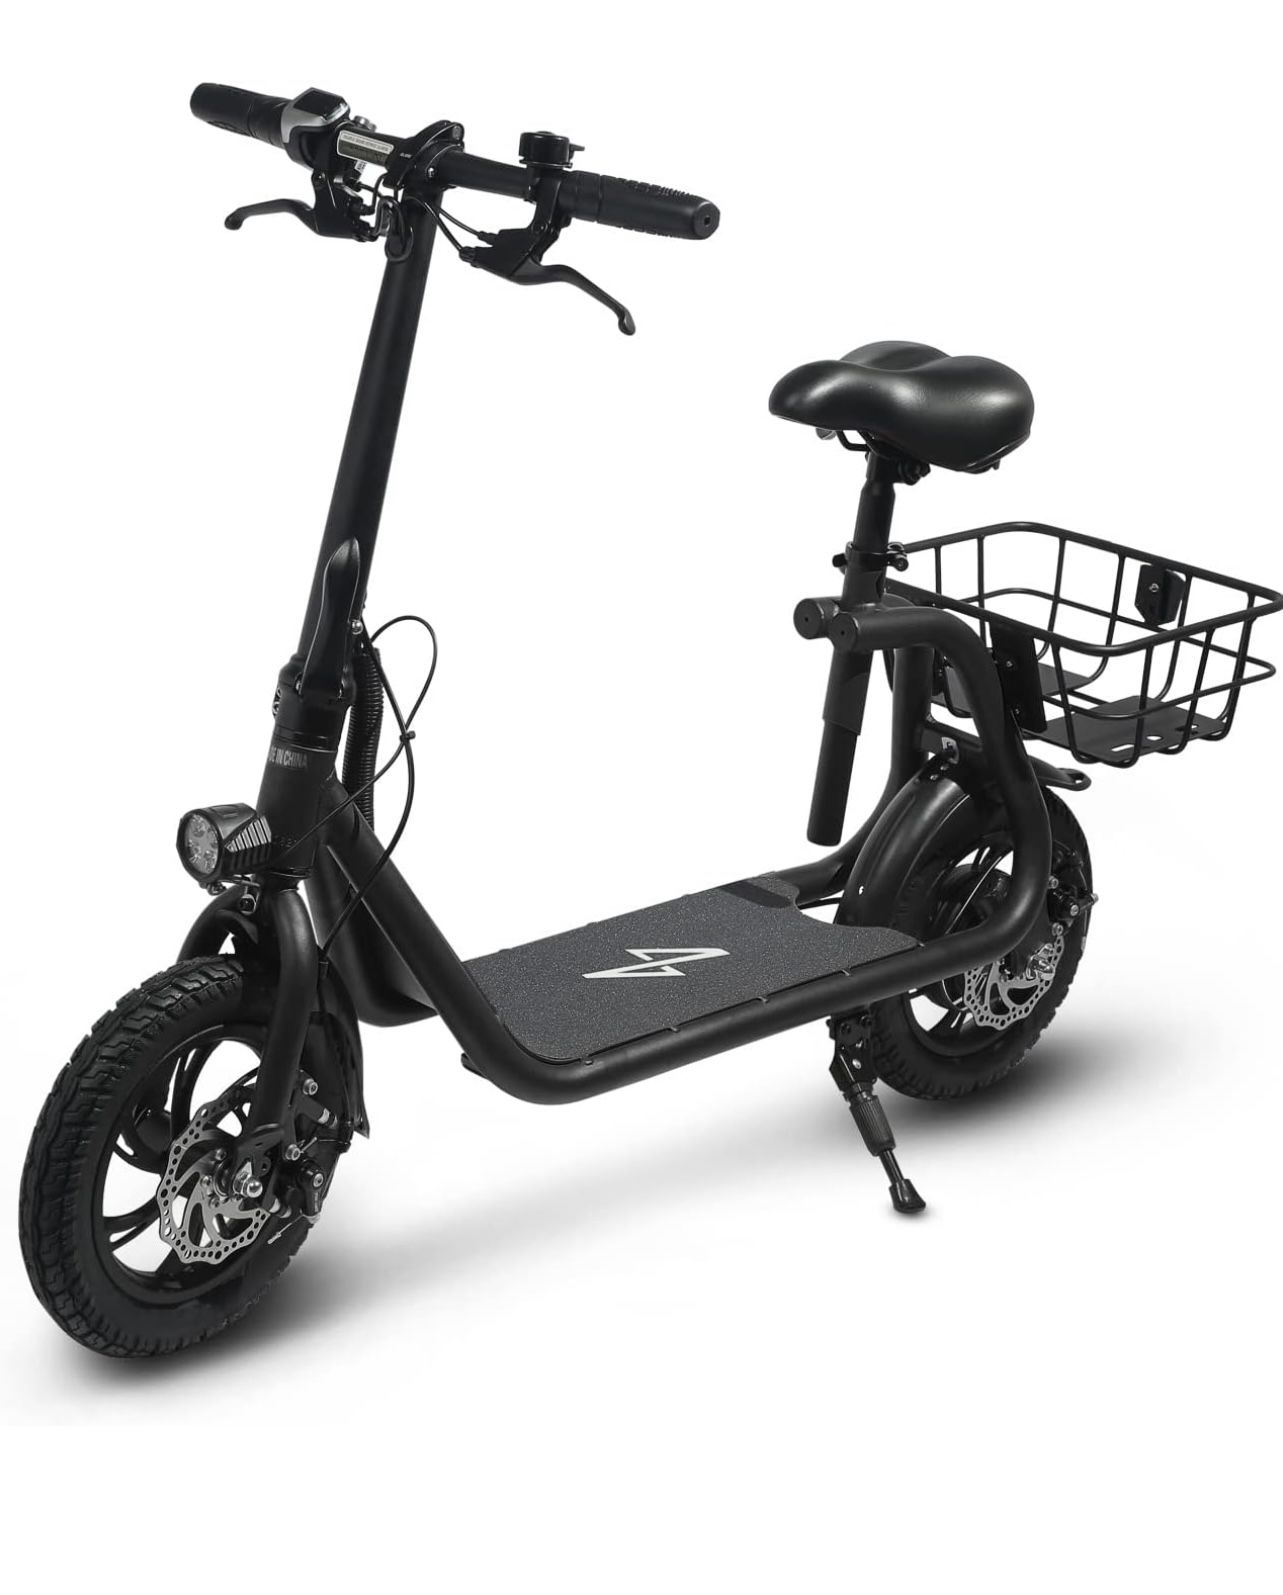 Phantomgogo Commuter R1 - Electric Scooter for Adults - Foldable Scooter with Seat & Carry Basket - 450W Brushless Motor 36V - 15MPH 265lbs Max Load E